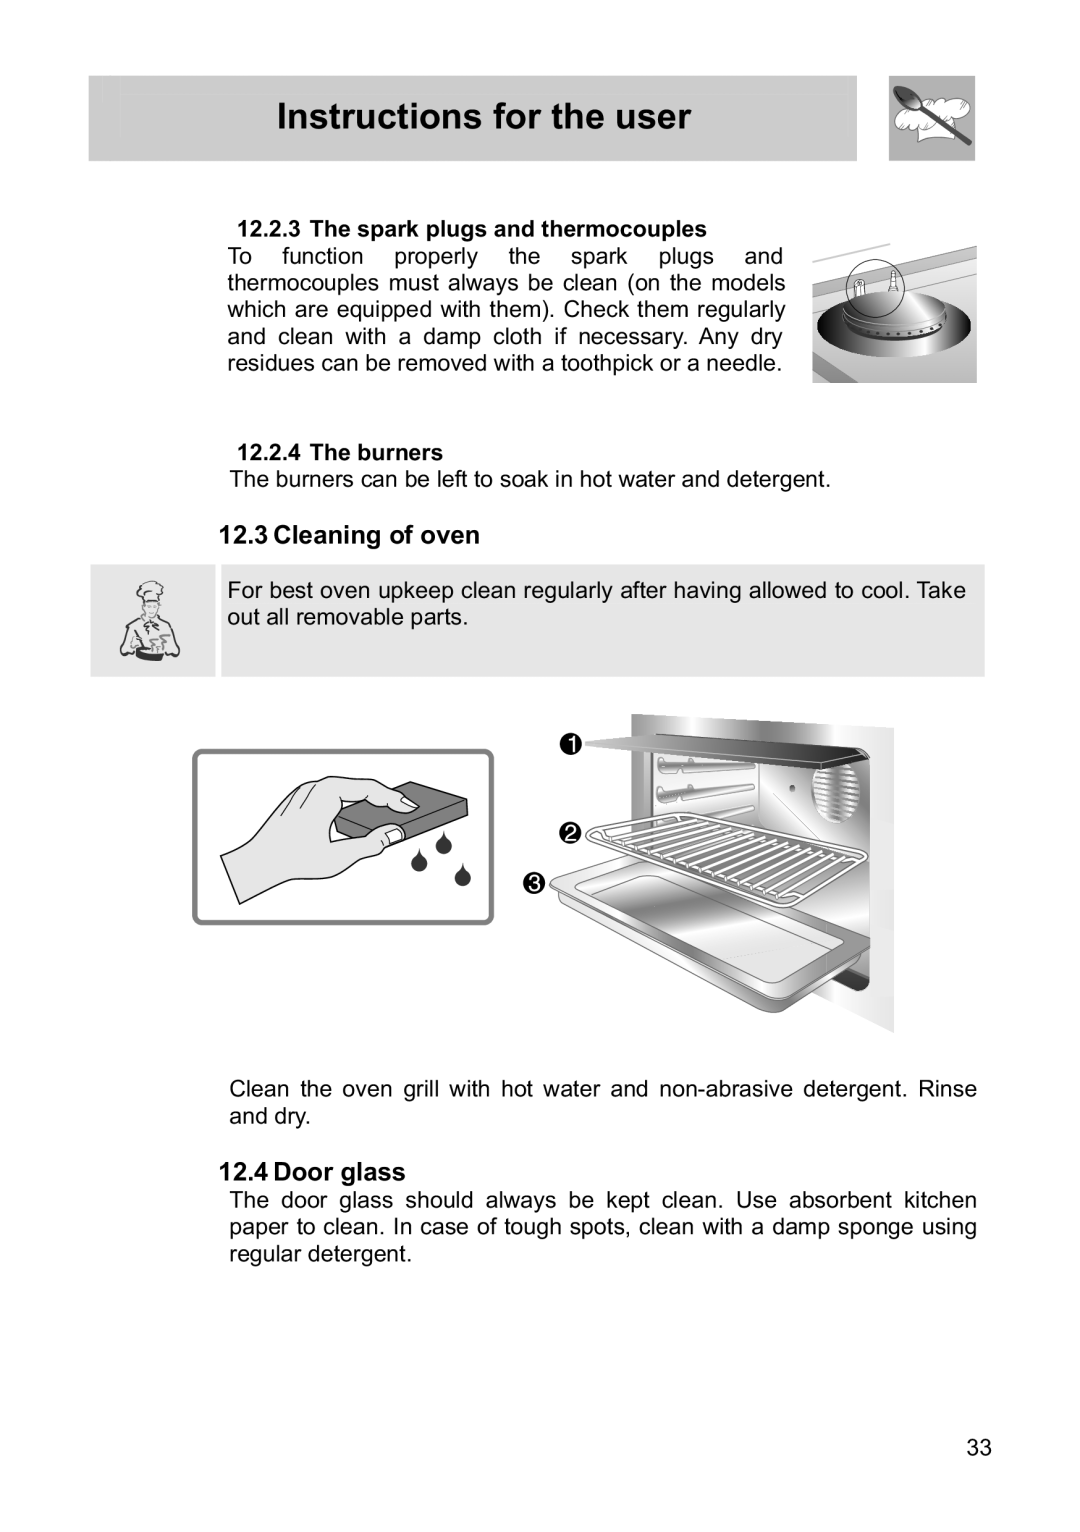 Smeg FS61MFX manual Cleaning of oven, Door glass, Instructions for the user, The spark plugs and thermocouples, The burners 